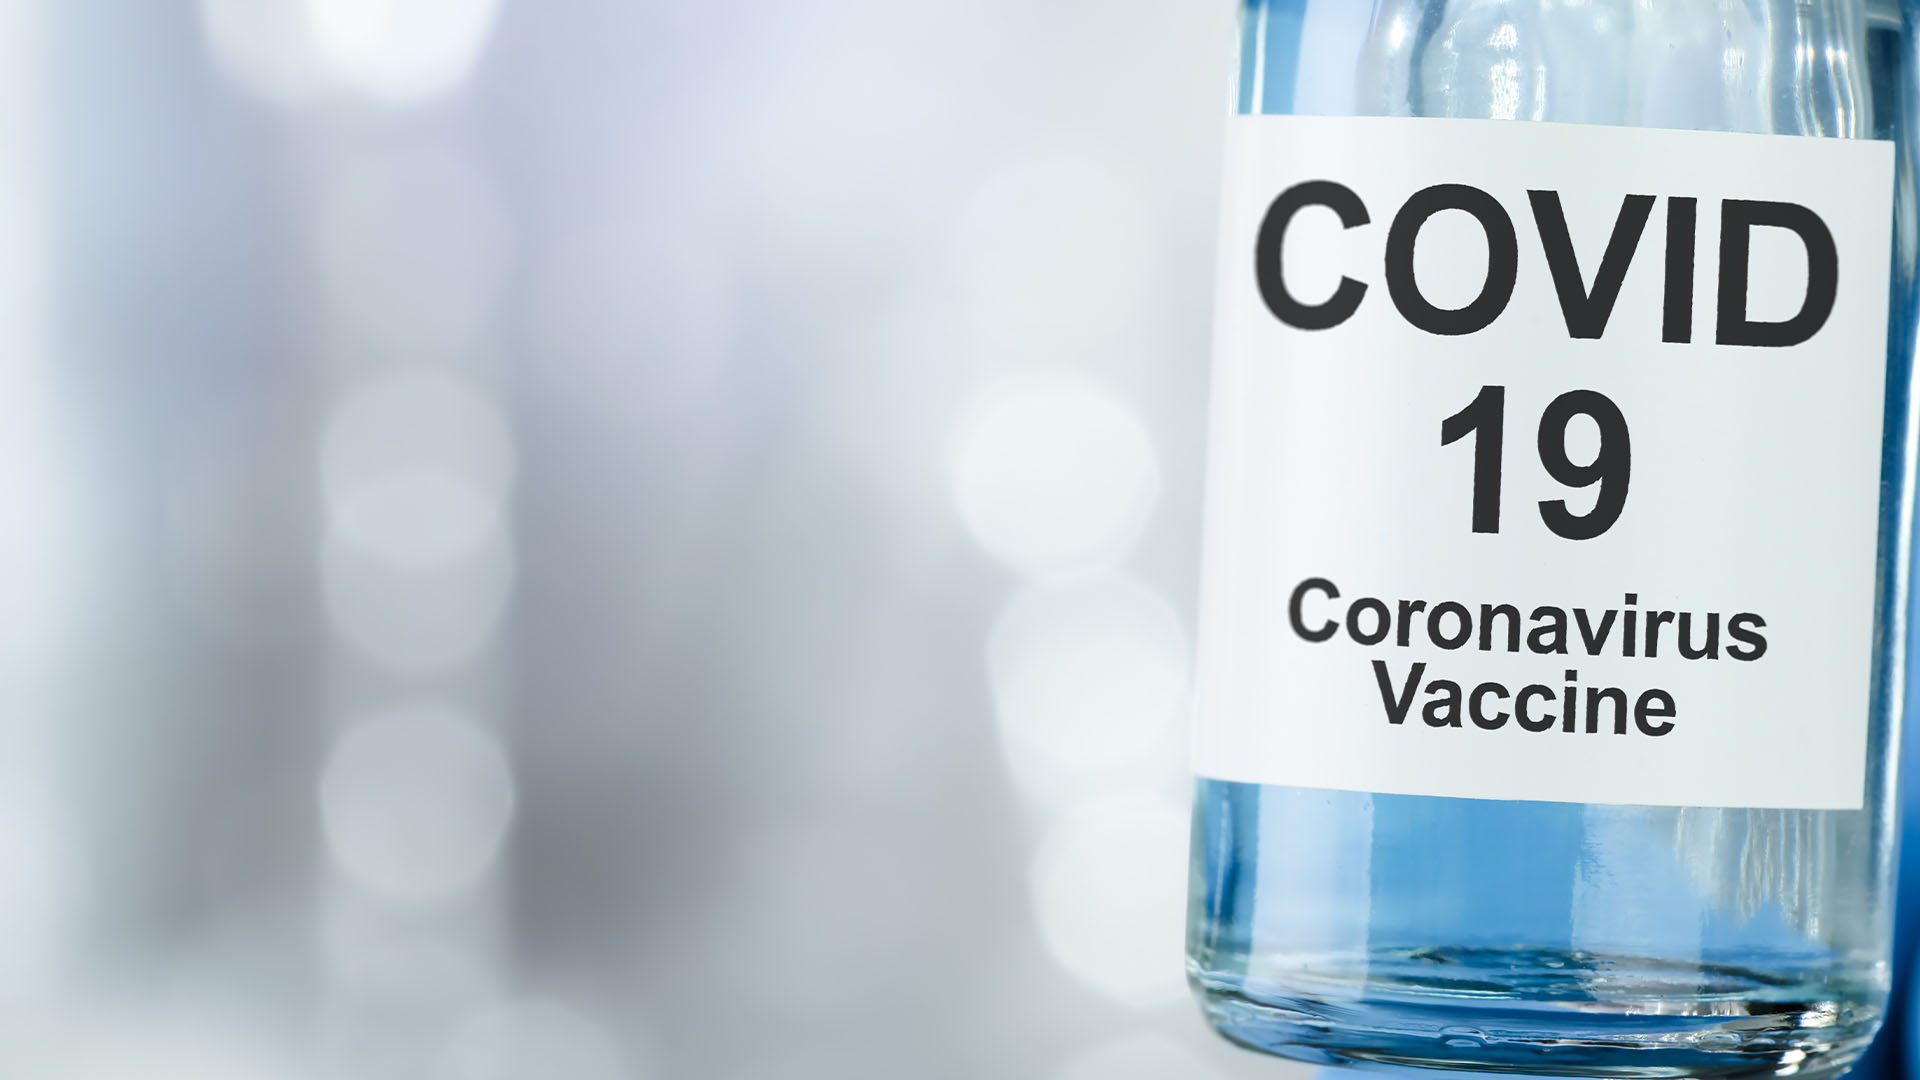 Can French employers require their employees to get the Covid-19 vaccine?